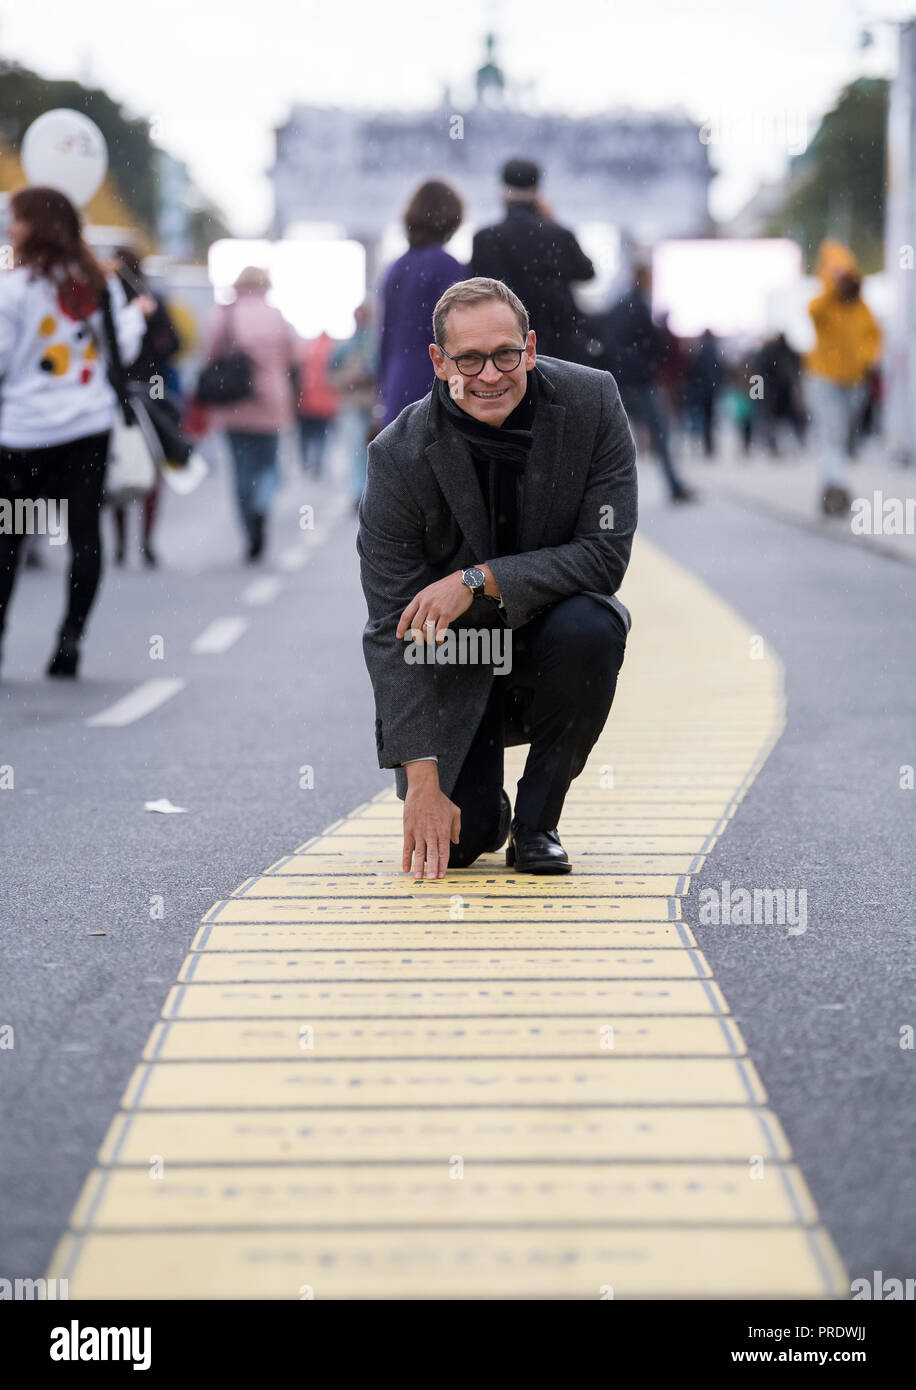 01 October 2018, Berlin: 01 October 2018, Germany, Berlin: Michael Mueller (C, SPD), Governing Mayor of Berlin and current President of the Bundesrat, is taking a tour of the Buergerfestmeile at the start of the celebrations for German Unification Day together with Moritz van Duelmen (L), Managing Director of Kulturprojekte Berlin GmbH, and Julian Mieth (R), Deputy Senate Spokesman. He points to the band of unity with the place names of all 11 040 German cities and municipalities. This year, Berlin is hosting the central celebration of the anniversary of German unity. The citizens' festival ar Stock Photo